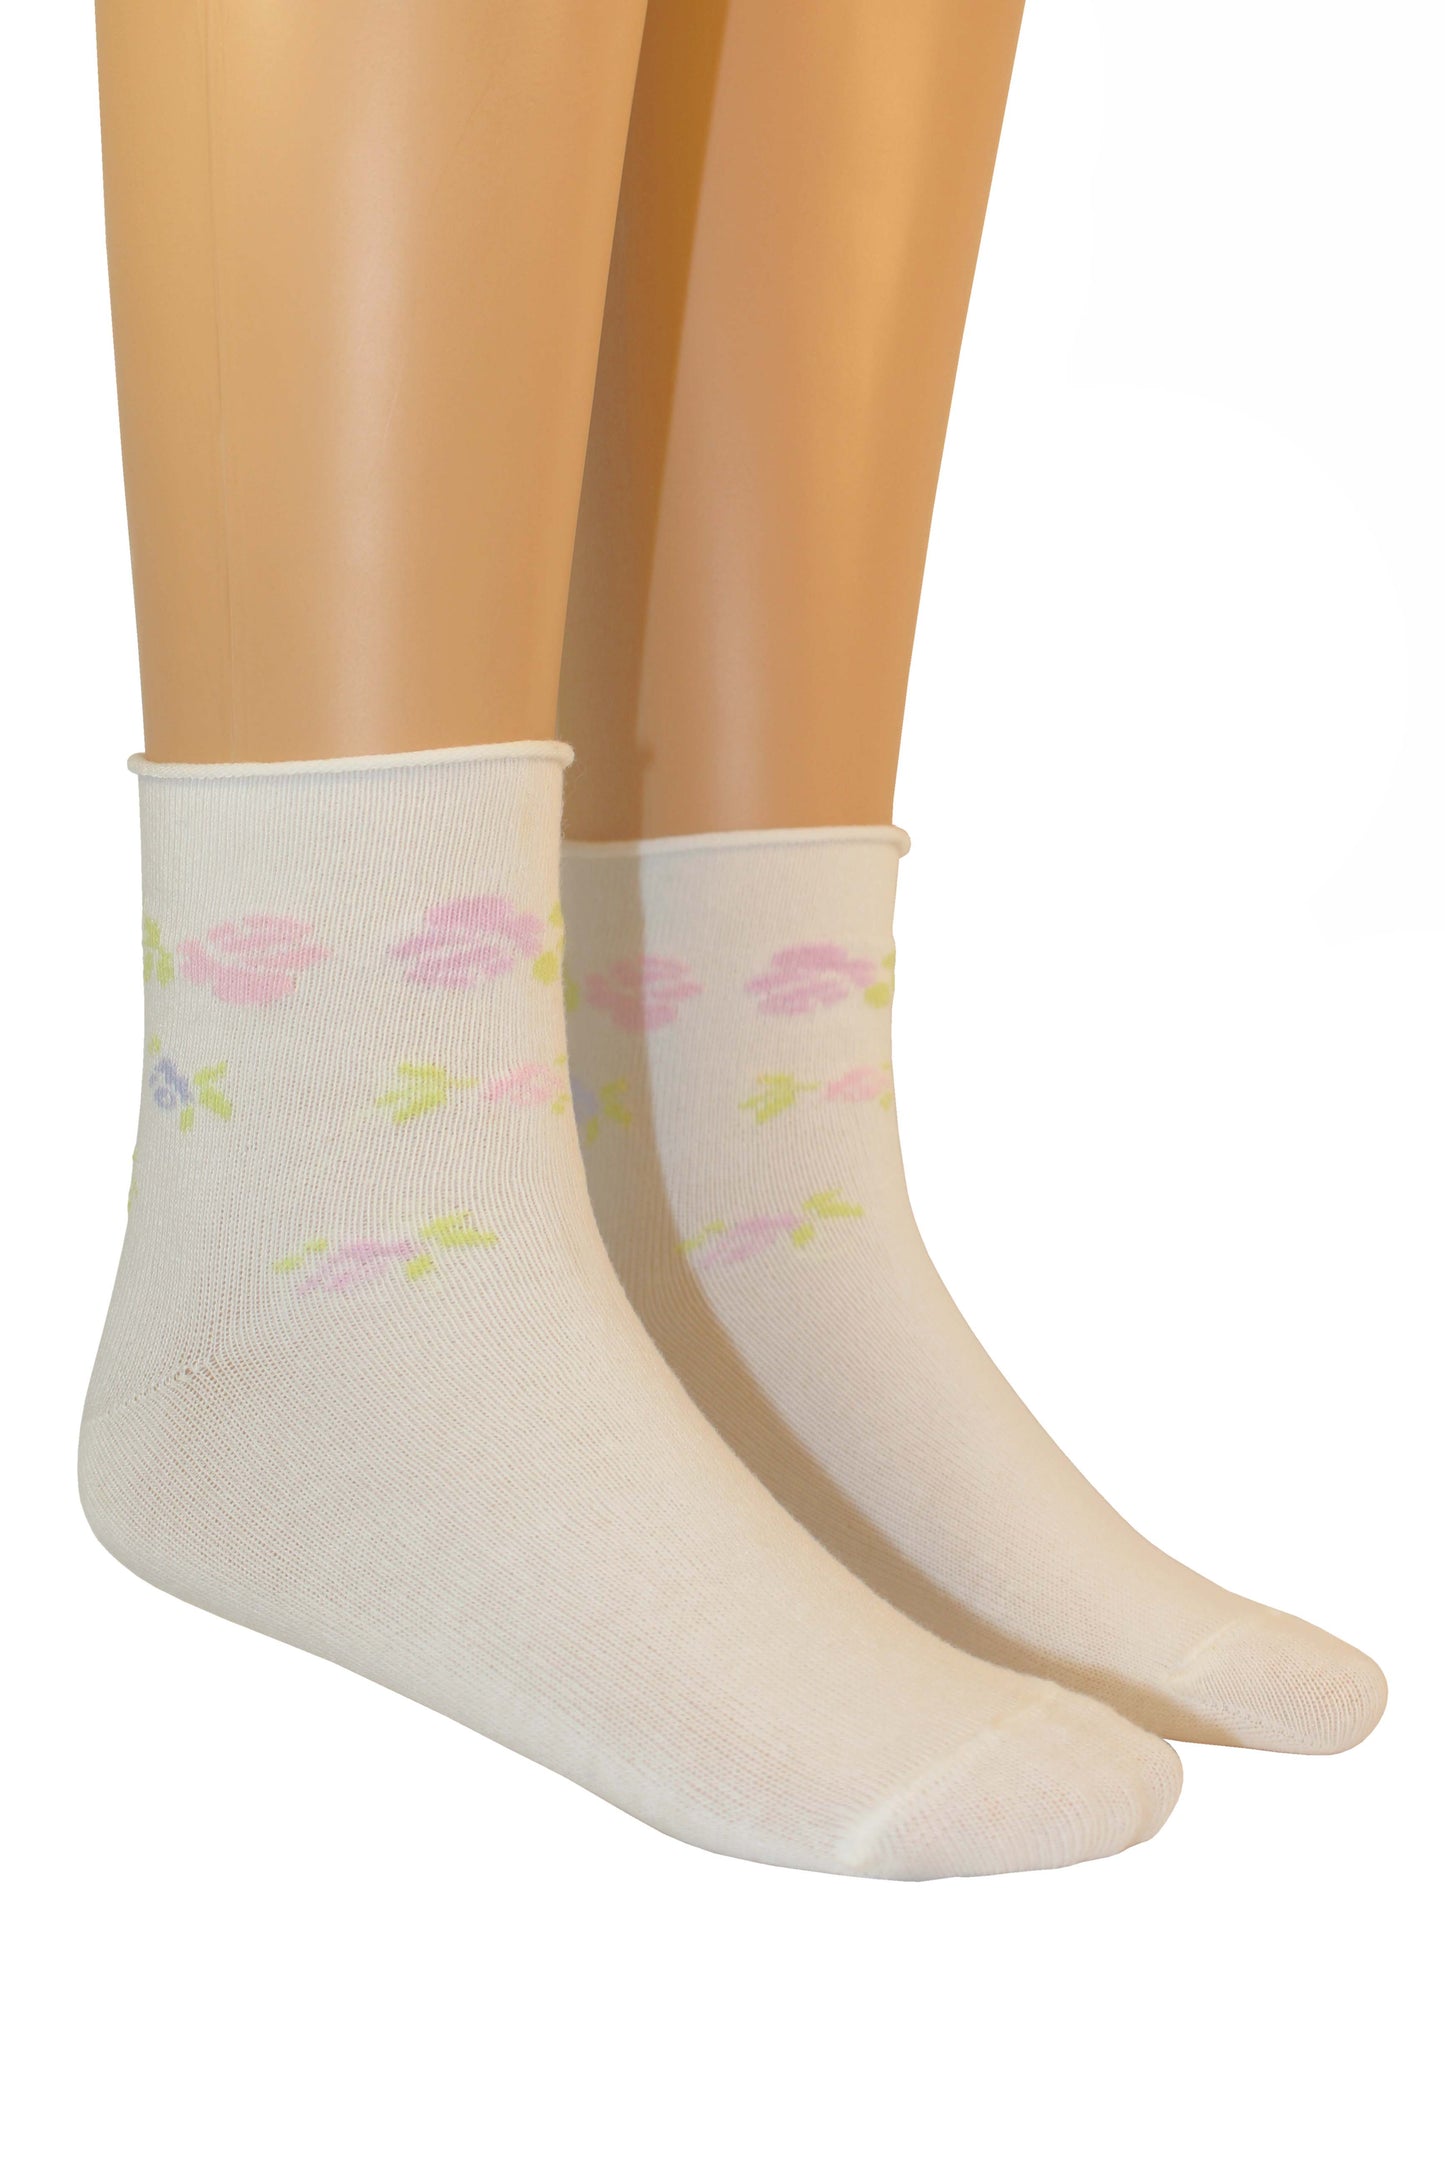 Omsa Serenella Pic Nic Calzino - Ivory cream children's cotton no cuff cotton ankle socks with a colourful woven floral style pattern around the cuff in shades of pink, purple and lime green.